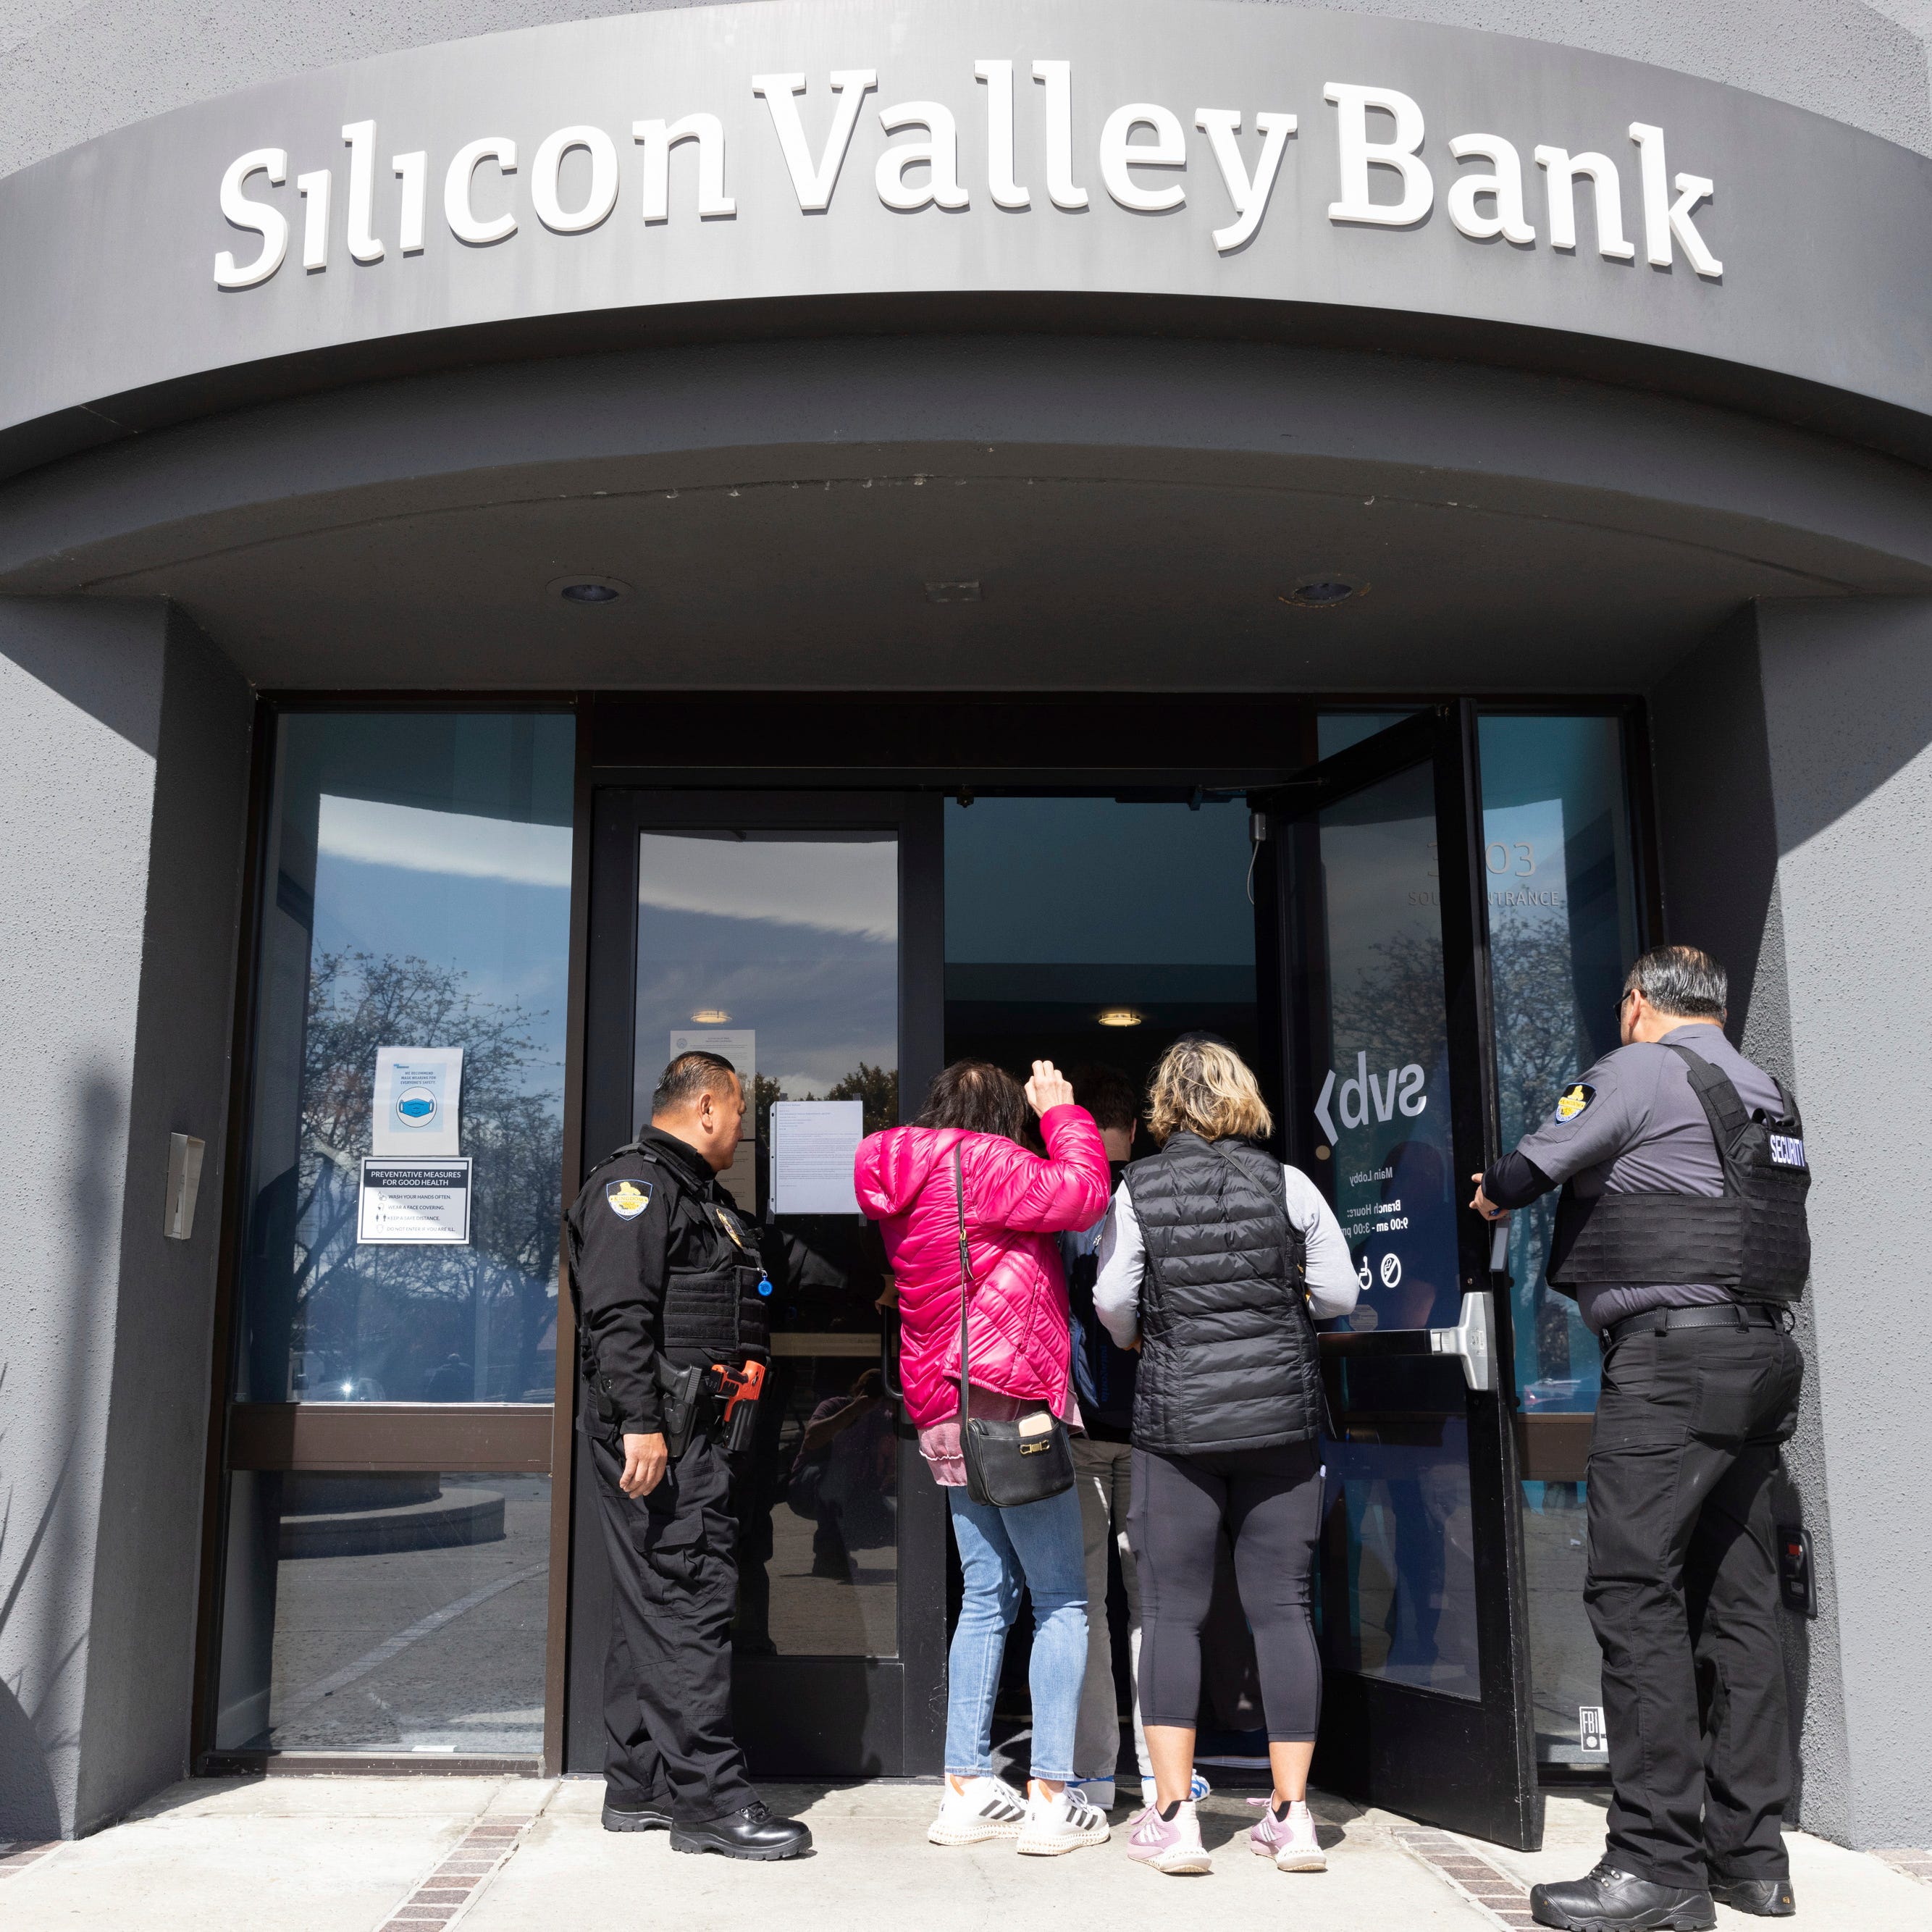 Security guards let individuals enter the Silicon Valley Bank's headquarters in Santa Clara, Calif., on March 13, 2023. The Federal Deposit Insurance Corporation has taken over the bank after failed attempts to sell it to healthier banks.